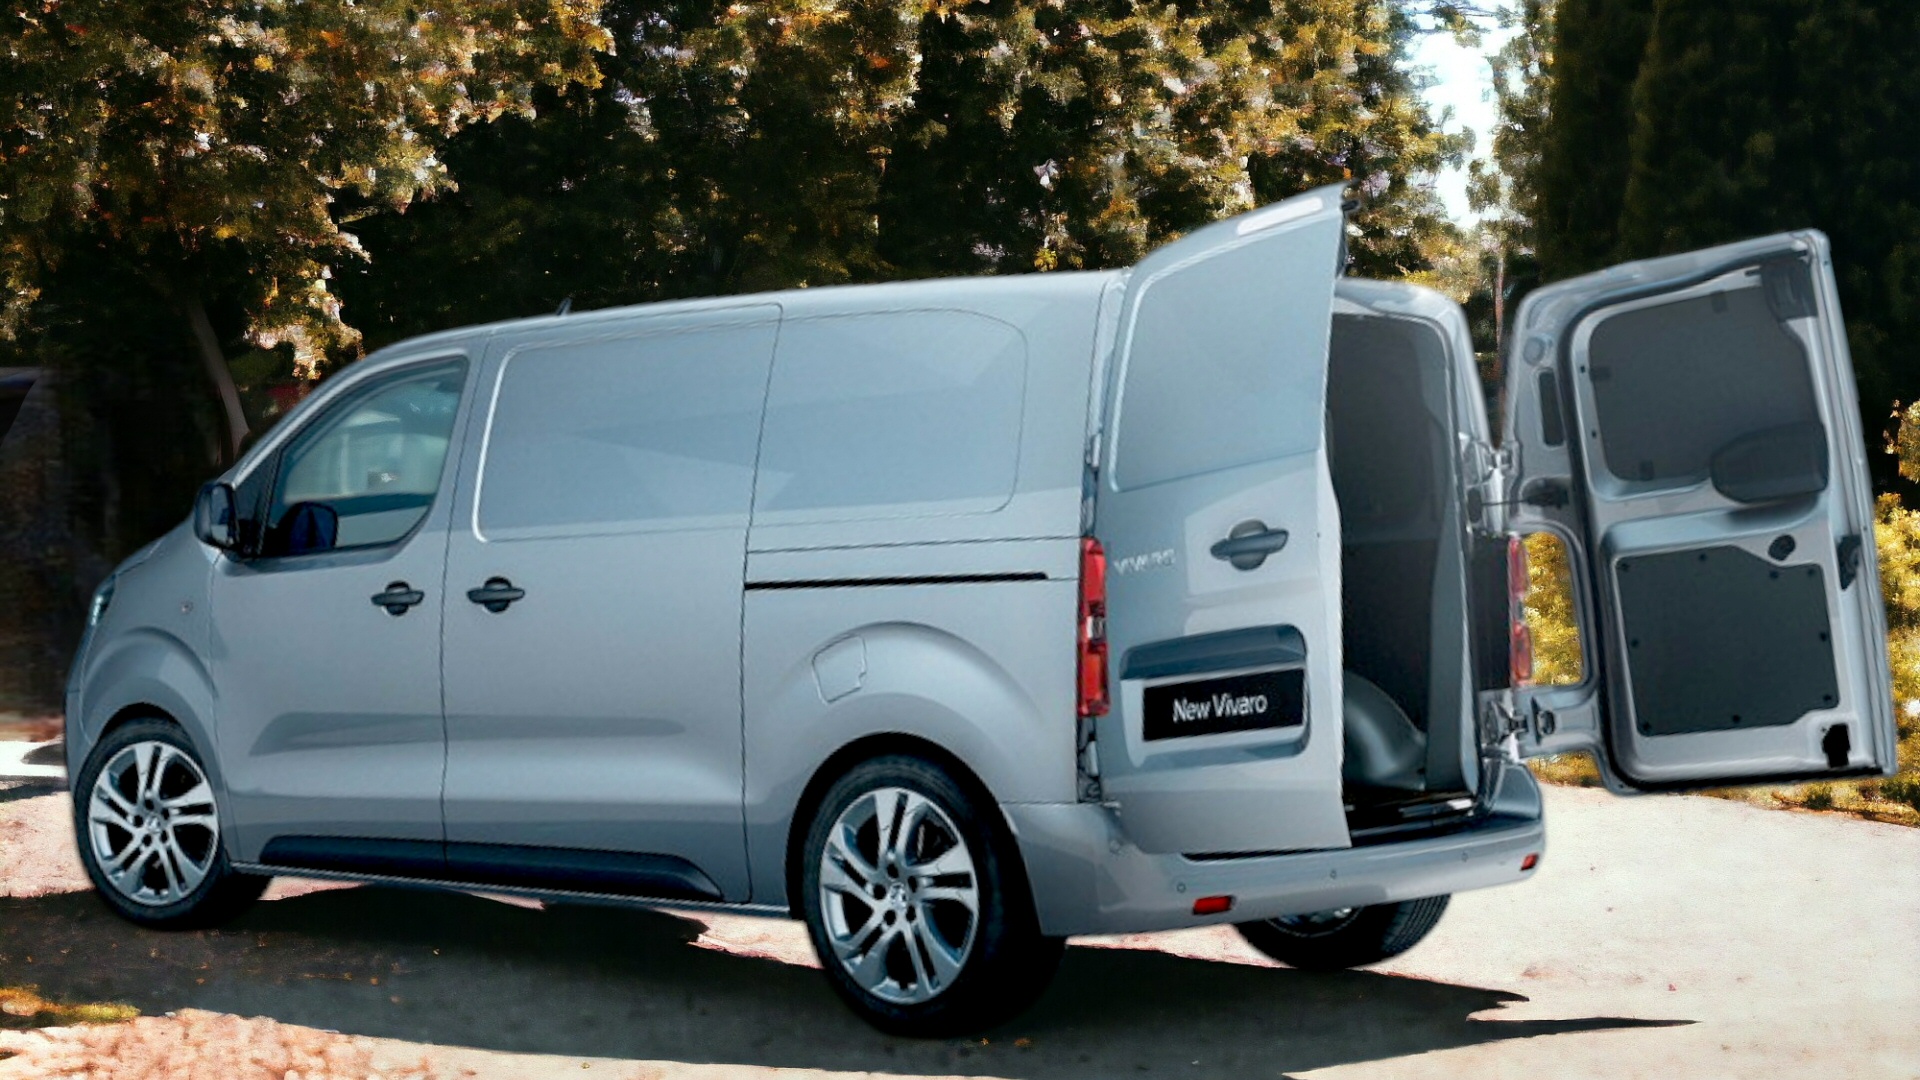 2014 Volkswagen Transporter - Combined Cycle 5.8 l / 100 km